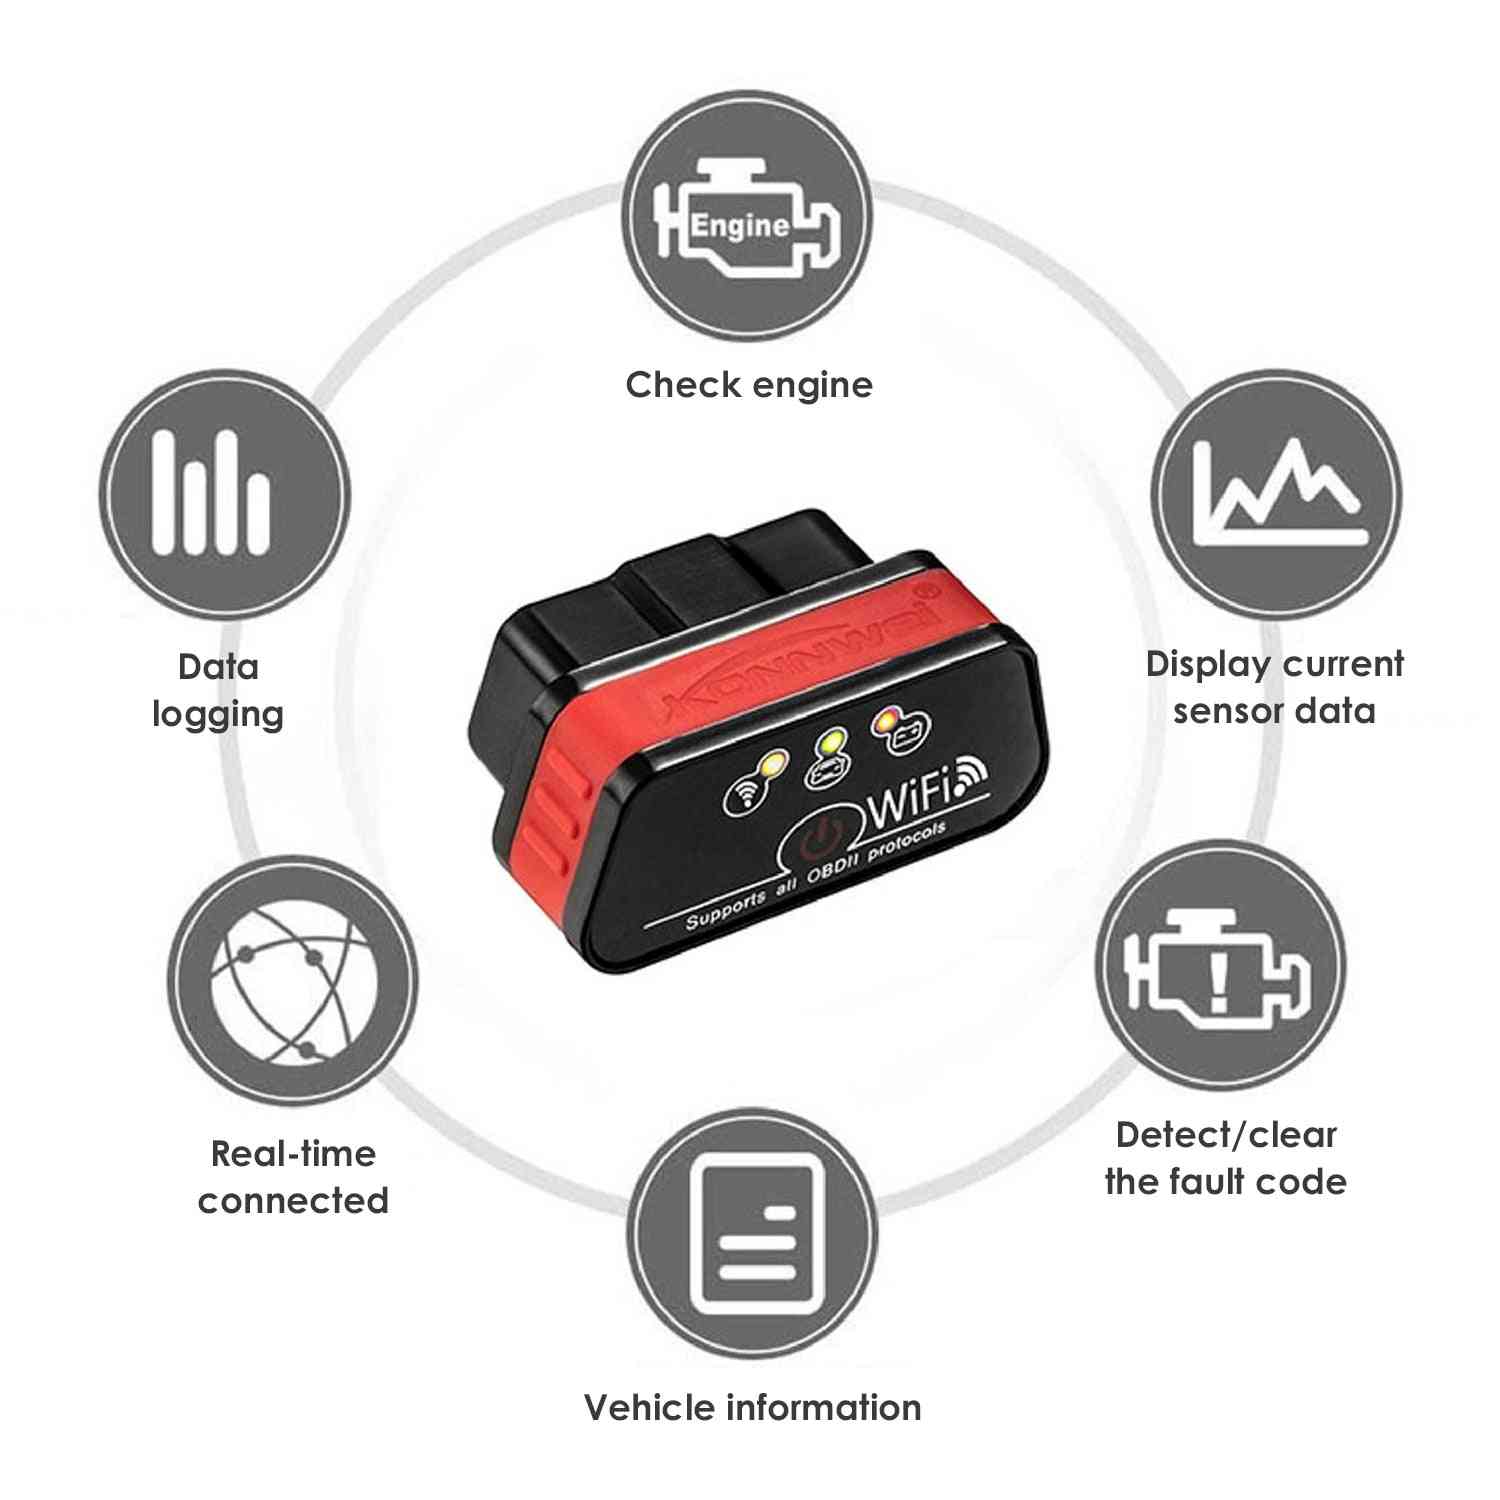 Wifi obd2 bluetooth scanner voor android/pc/ios obdii codelezer